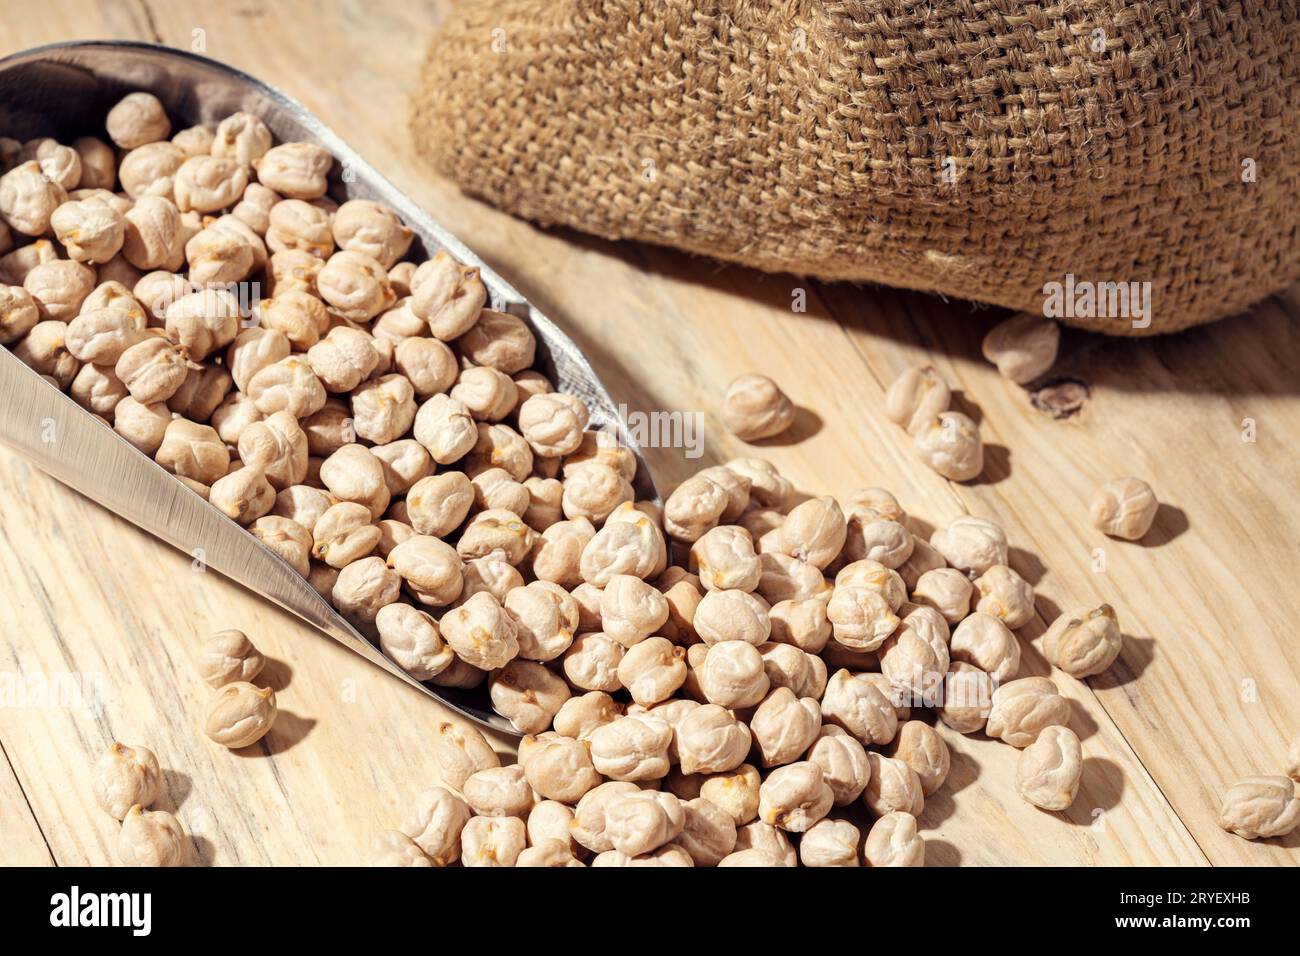 Uncooked Chickpeas on scoop on rustic wooden table. Rustic still life Stock Photo